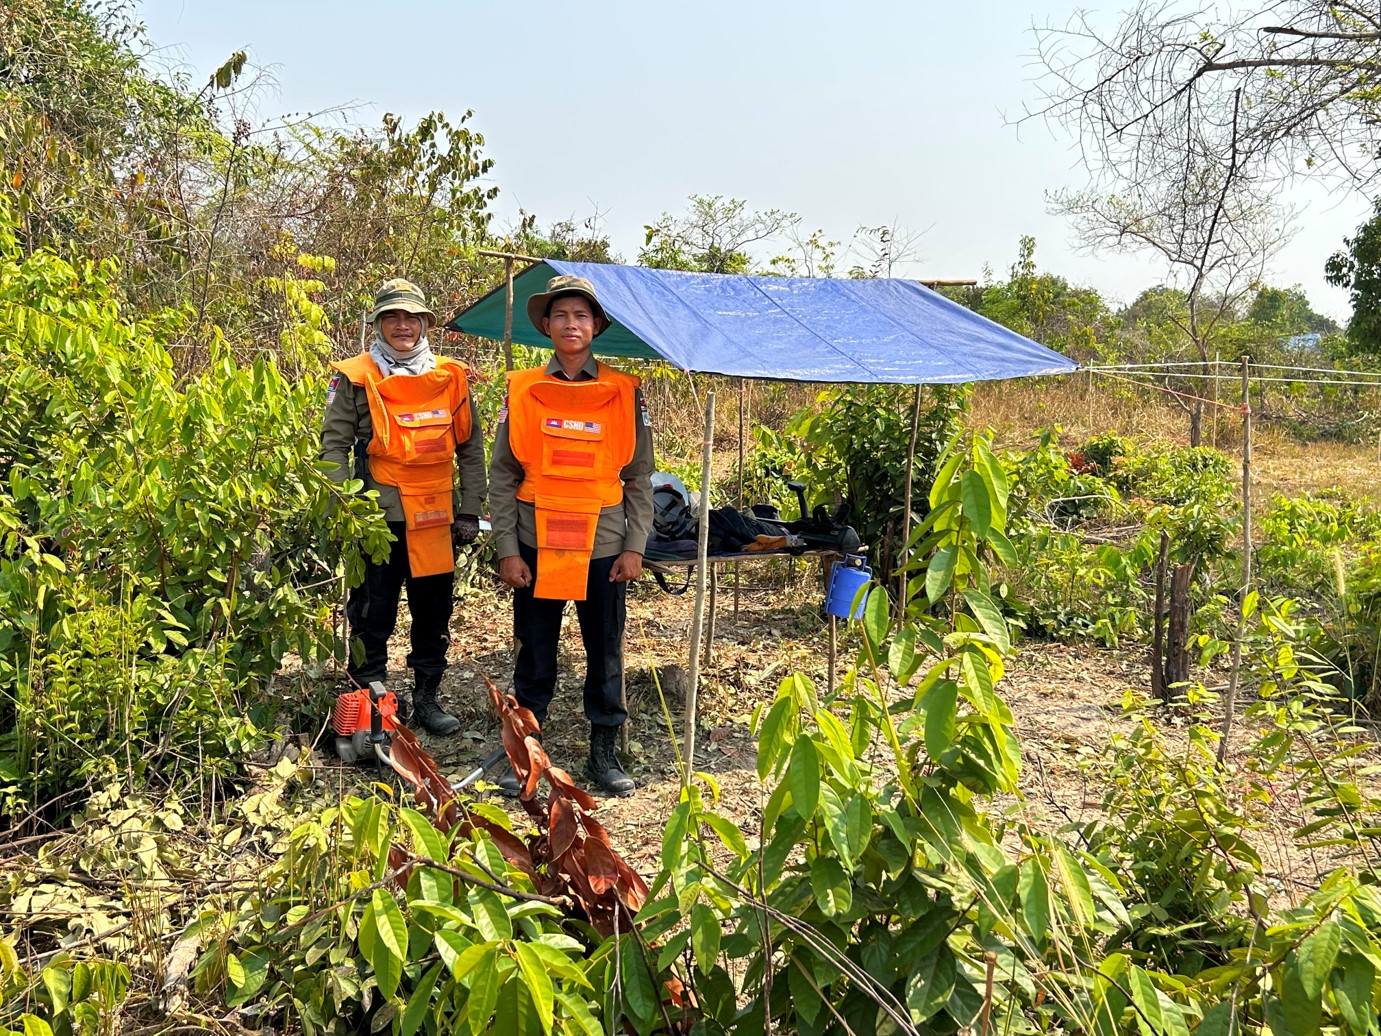 Deminers from the Cambodian Self Help Demining association. They have been trained by HI to decontaminate mined land. © HI